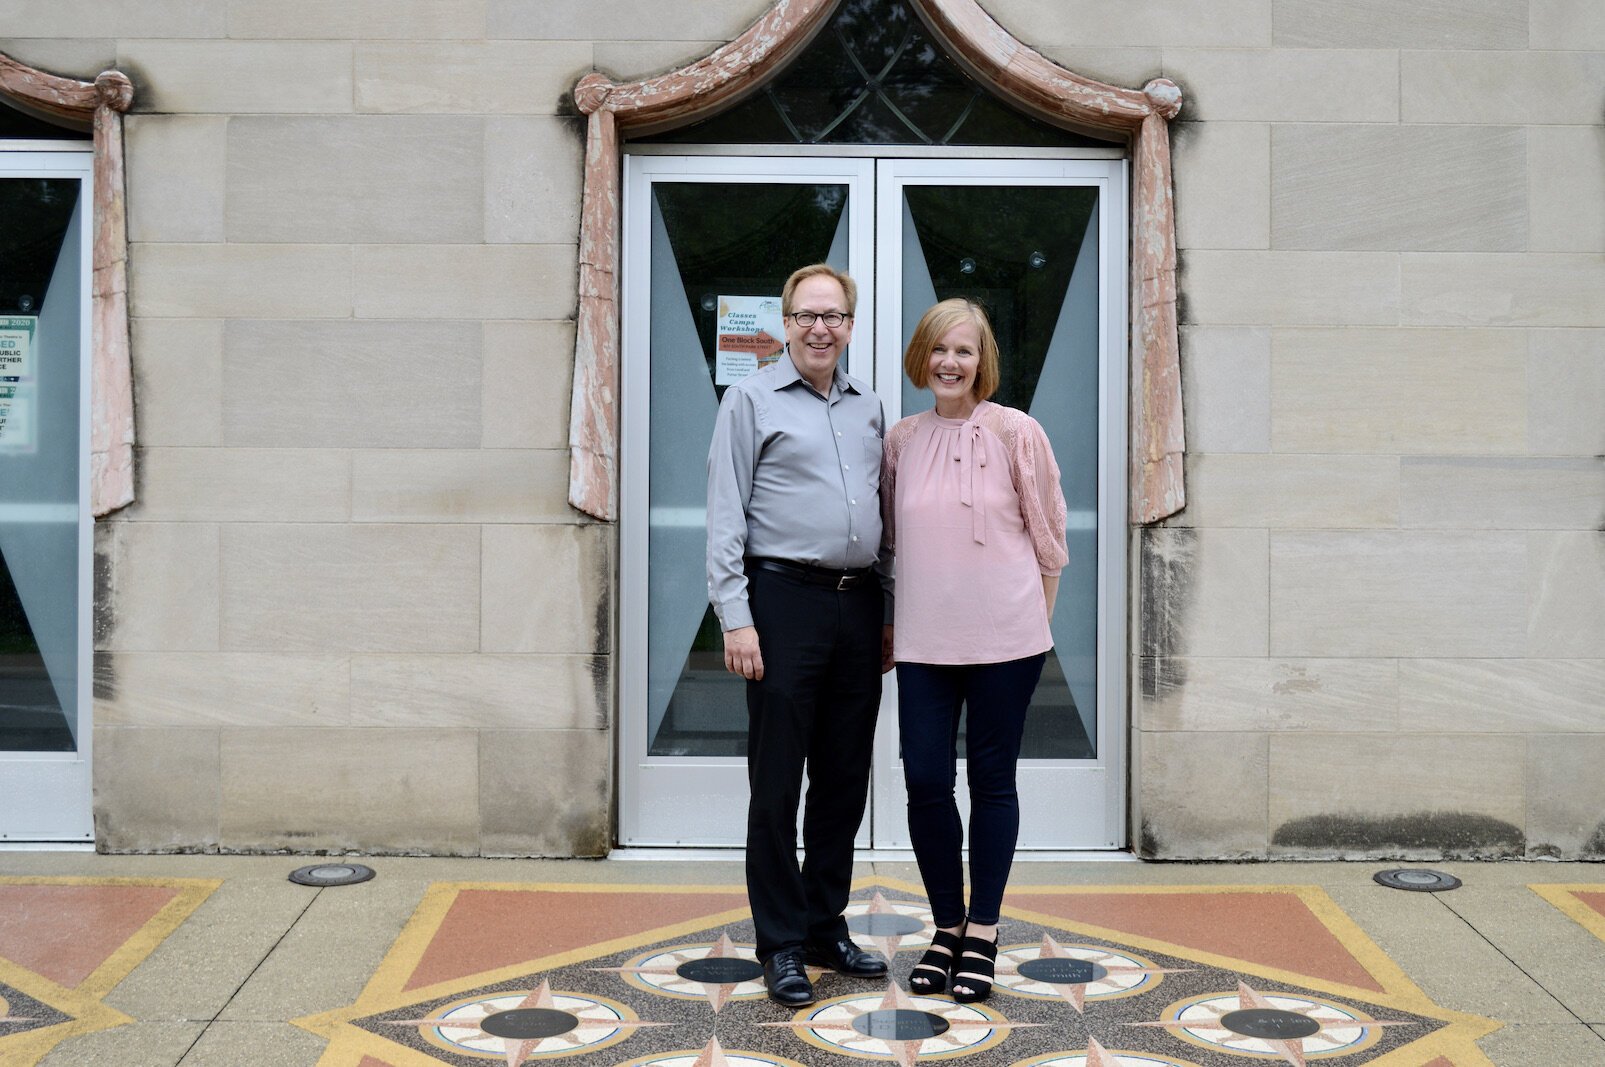  Zylman and Zervic are looking forward to "A Season of New Beginnings" when the Civic reopens.